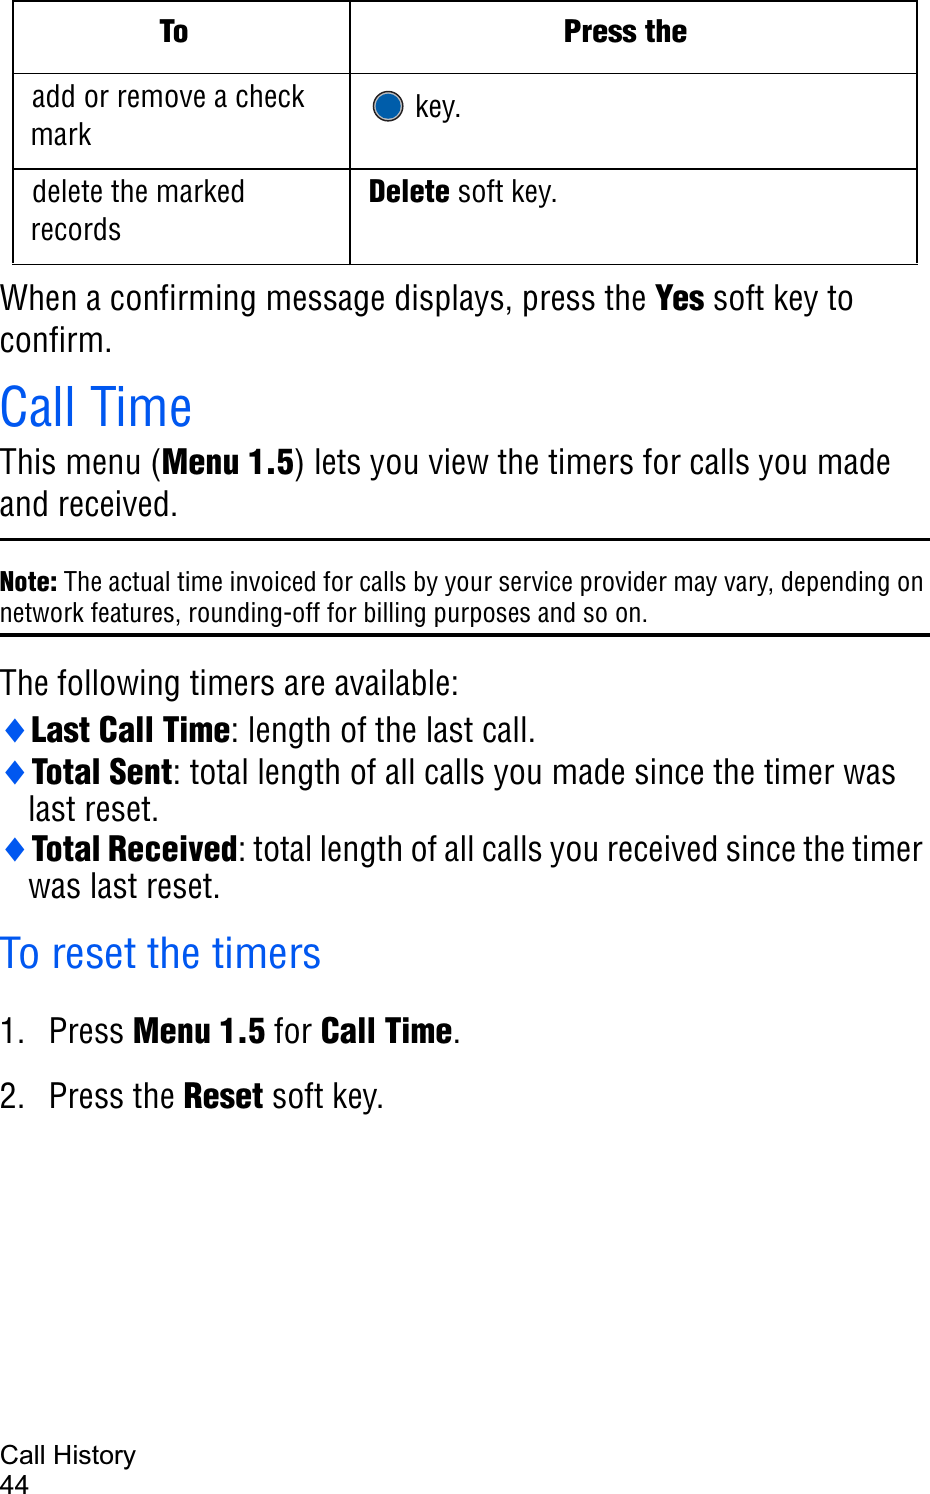 Call History44When a confirming message displays, press the Yes soft key to confirm.Call TimeThis menu (Menu 1.5) lets you view the timers for calls you made and received. Note: The actual time invoiced for calls by your service provider may vary, depending on network features, rounding-off for billing purposes and so on.The following timers are available:iLast Call Time: length of the last call.iTotal Sent: total length of all calls you made since the timer was last reset.iTotal Received: total length of all calls you received since the timer was last reset.To reset the timers1. Press Menu 1.5 for Call Time.2. Press the Reset soft key.add or remove a check mark  key.delete the marked recordsDelete soft key.To Press the